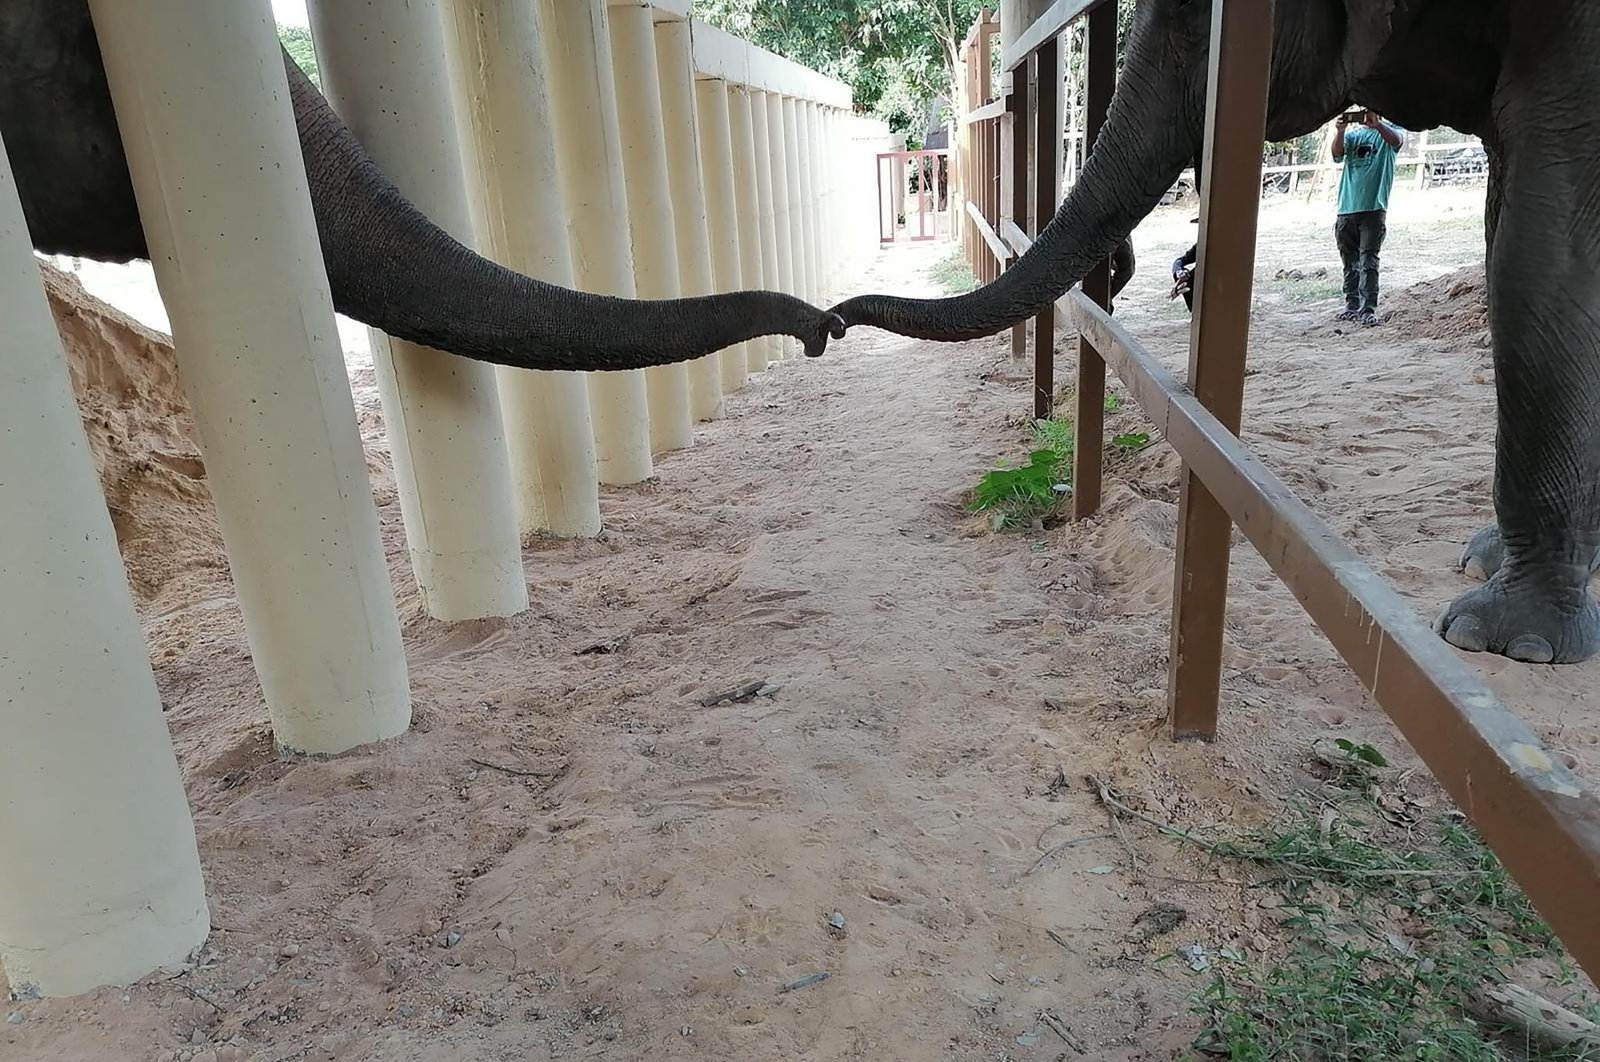 In this photo provided by Four Paws, an Asian elephant named Kaavan (L) touches the trunk of another elephant at the Kulen Prom Tep Wildlife Sanctuary in Oddar Meanchey, Cambodia, Dec. 1, 2020. (Four Paws via AP)